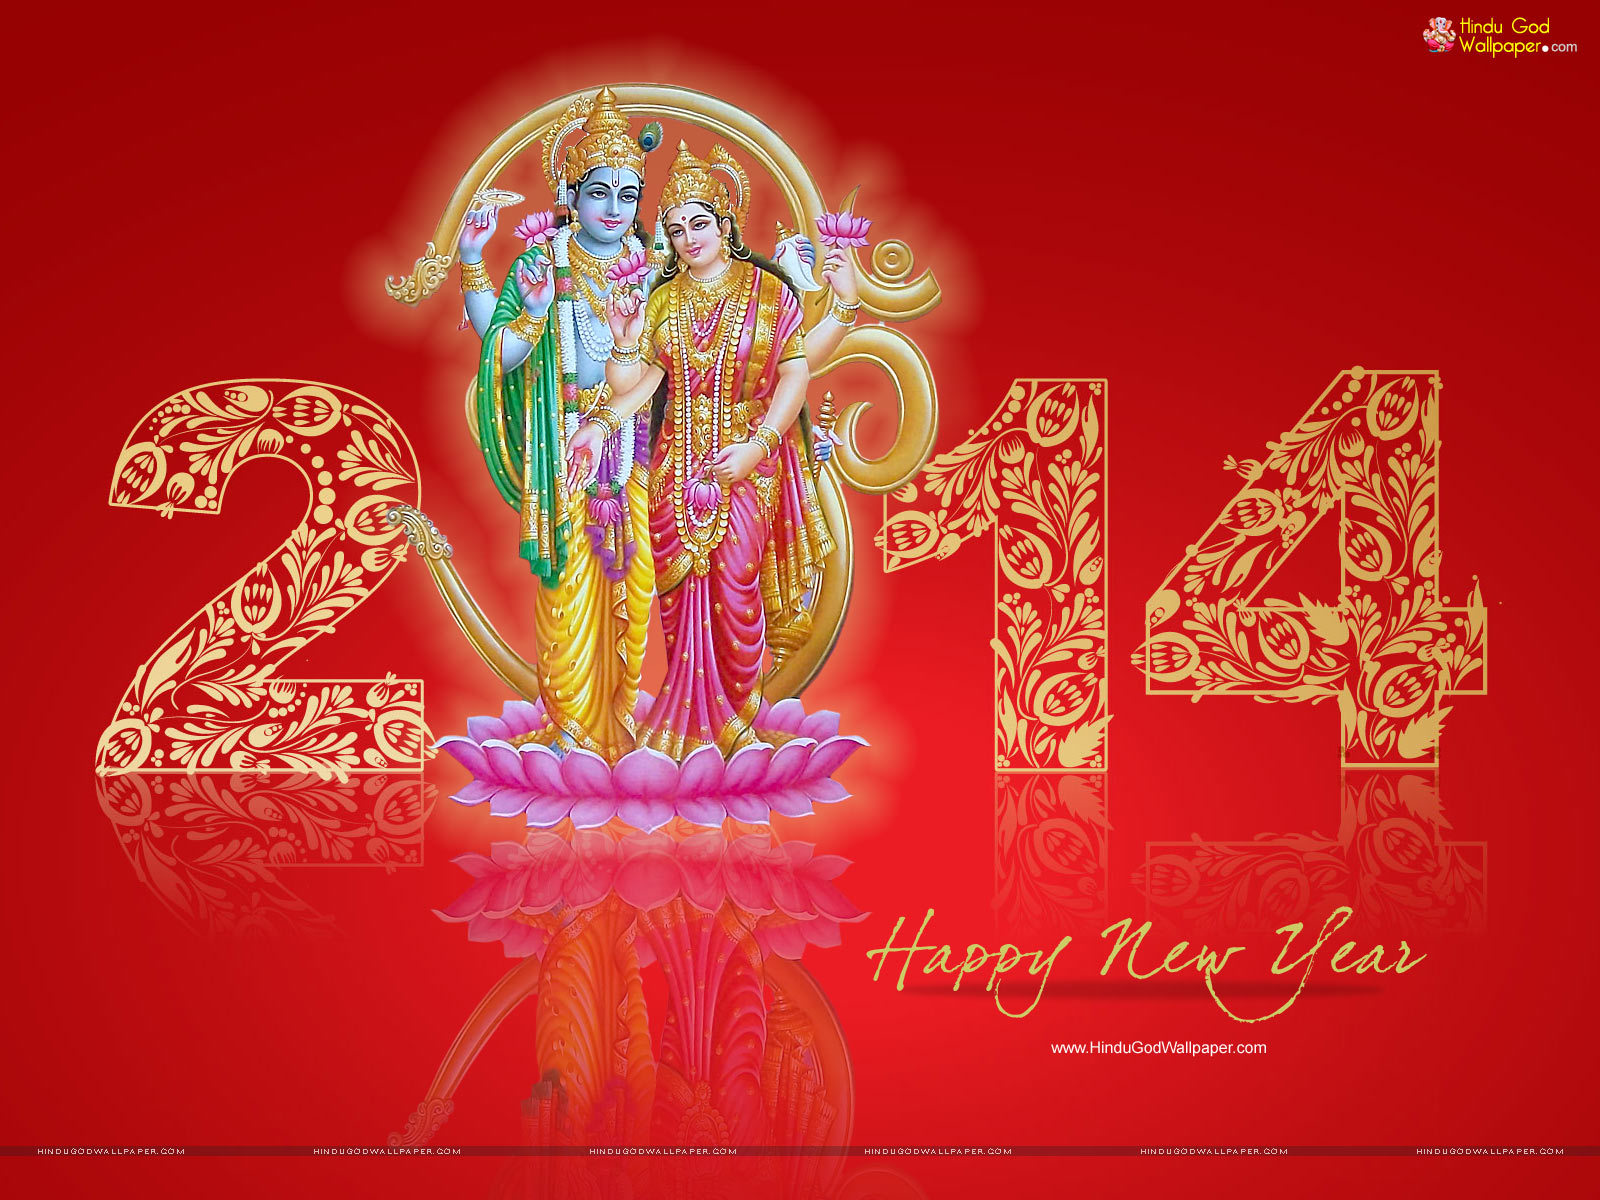 Happy New Year From India Wallpaper And Image Pictures